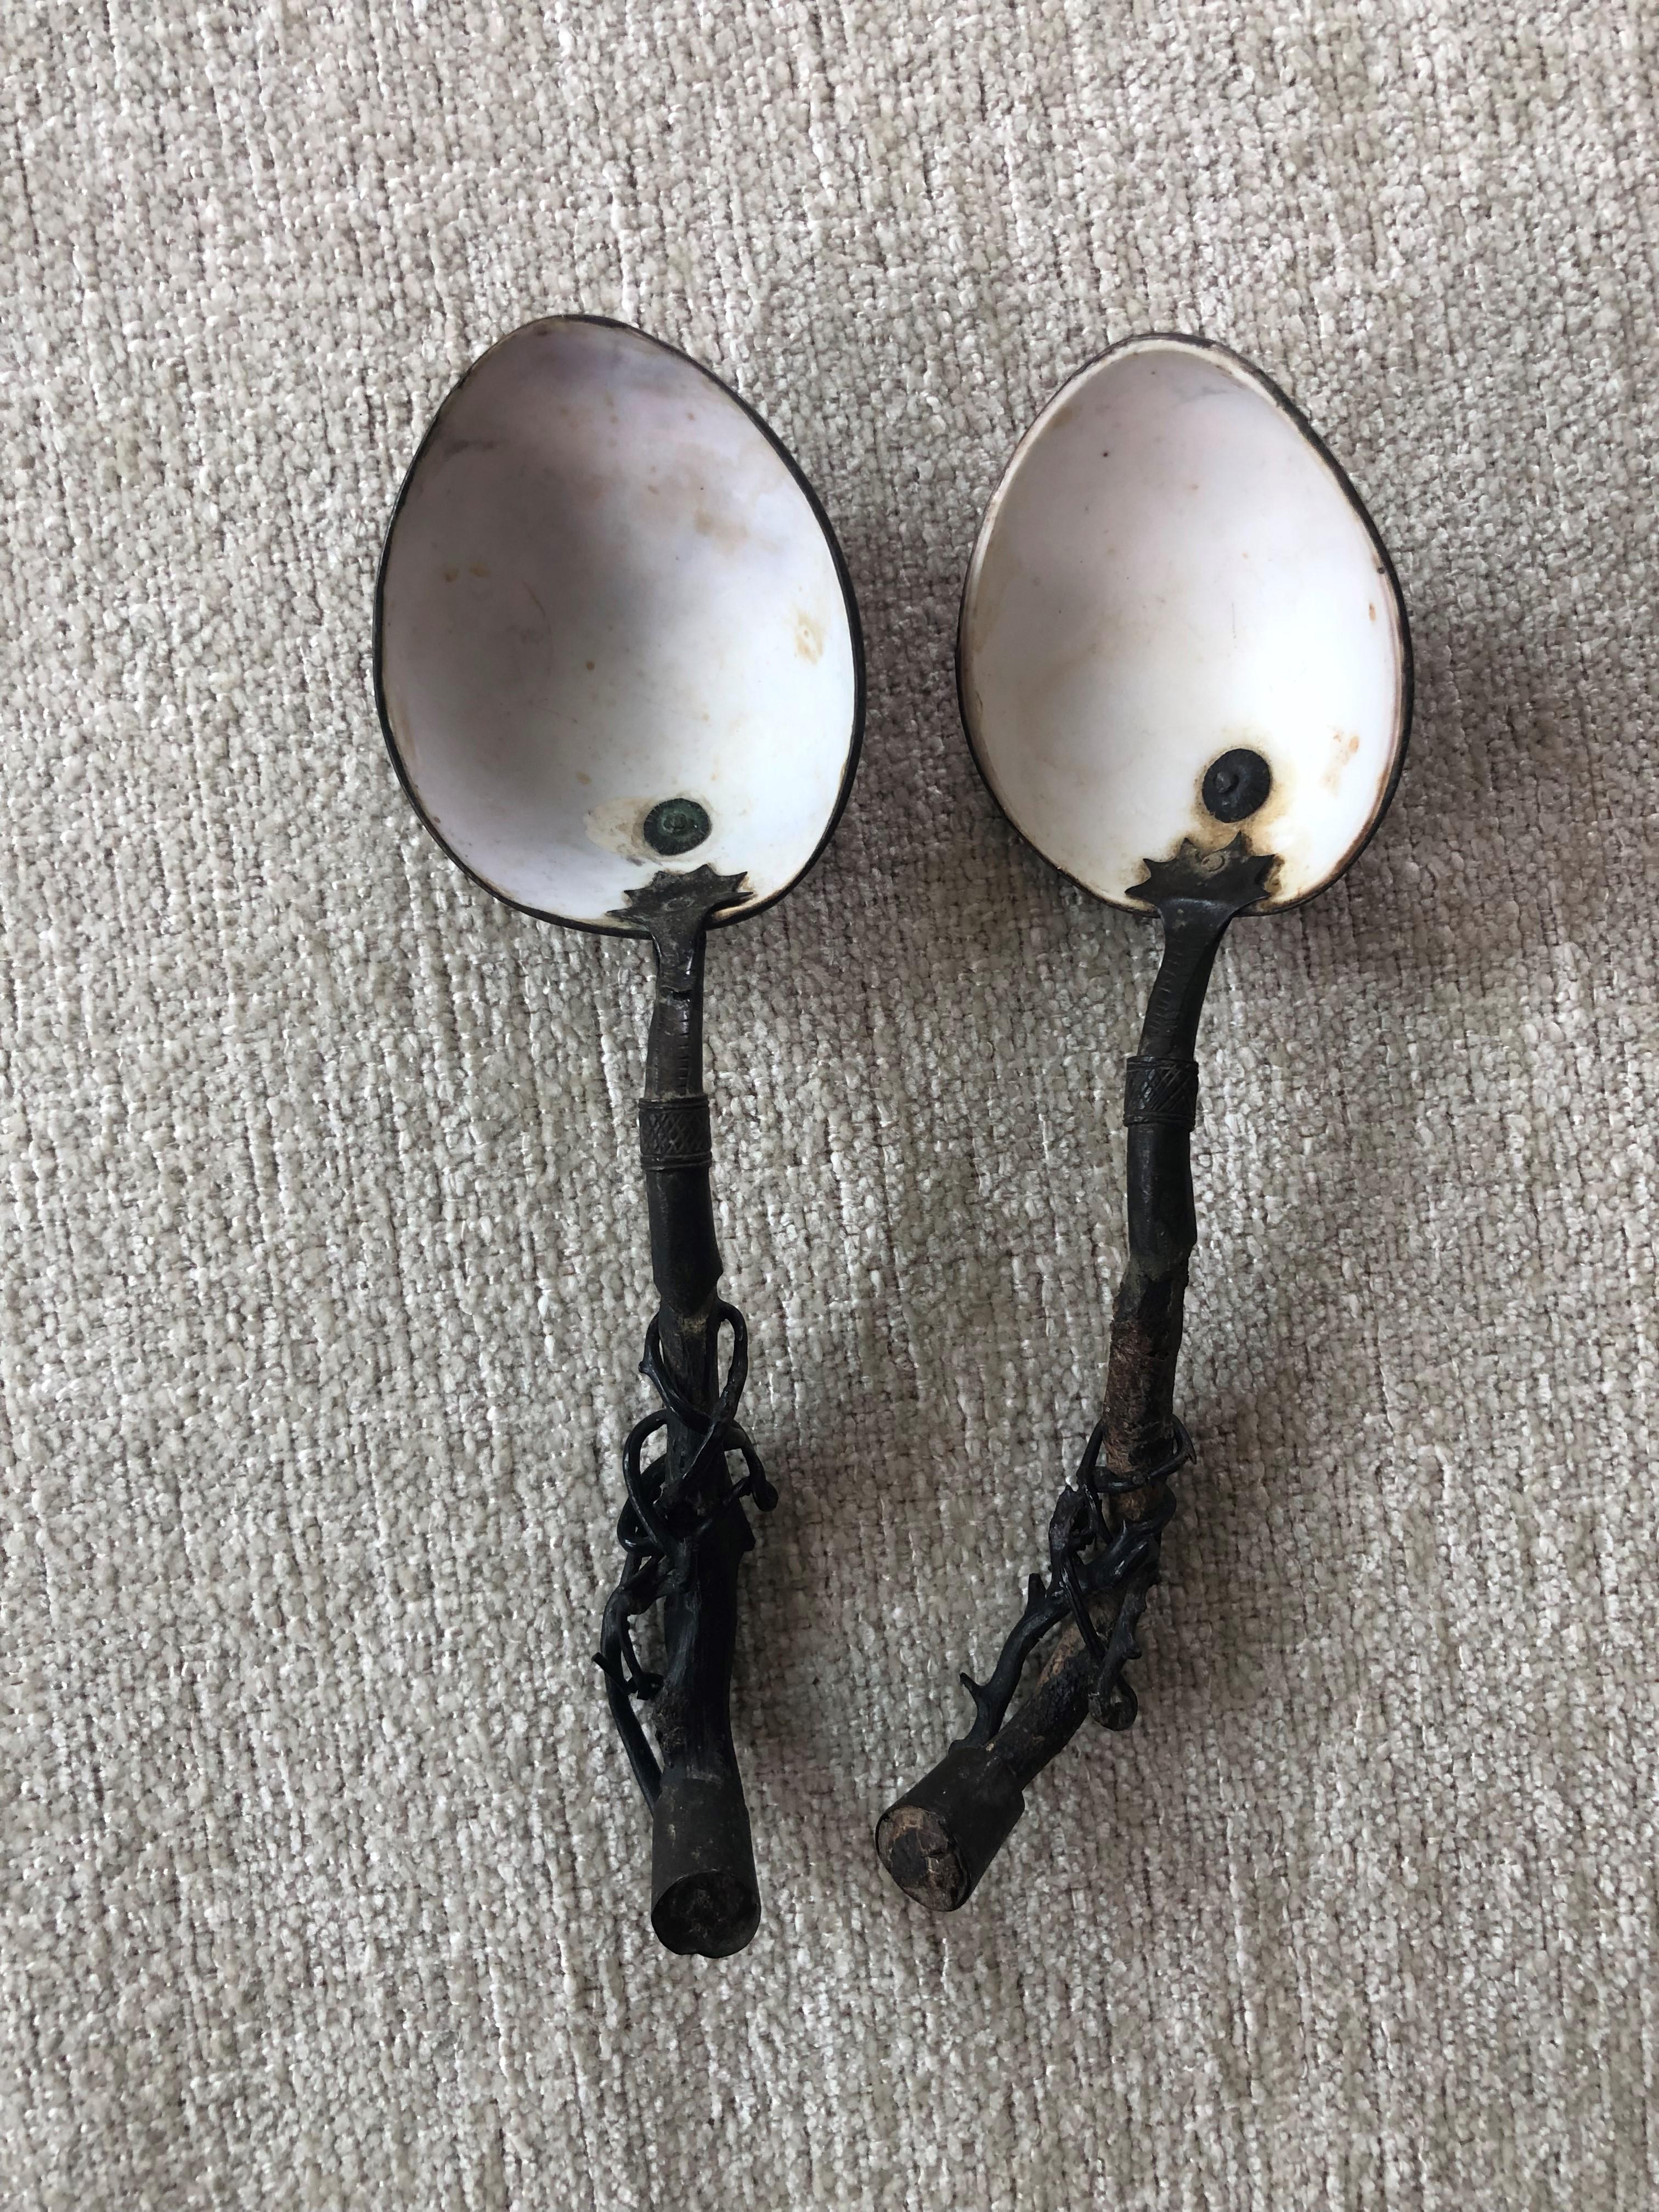 Pair of shell and twisted root spoons from the early 19th C. Handcrafted in Japan in a style that was celebrating nature. Very unique and rare.